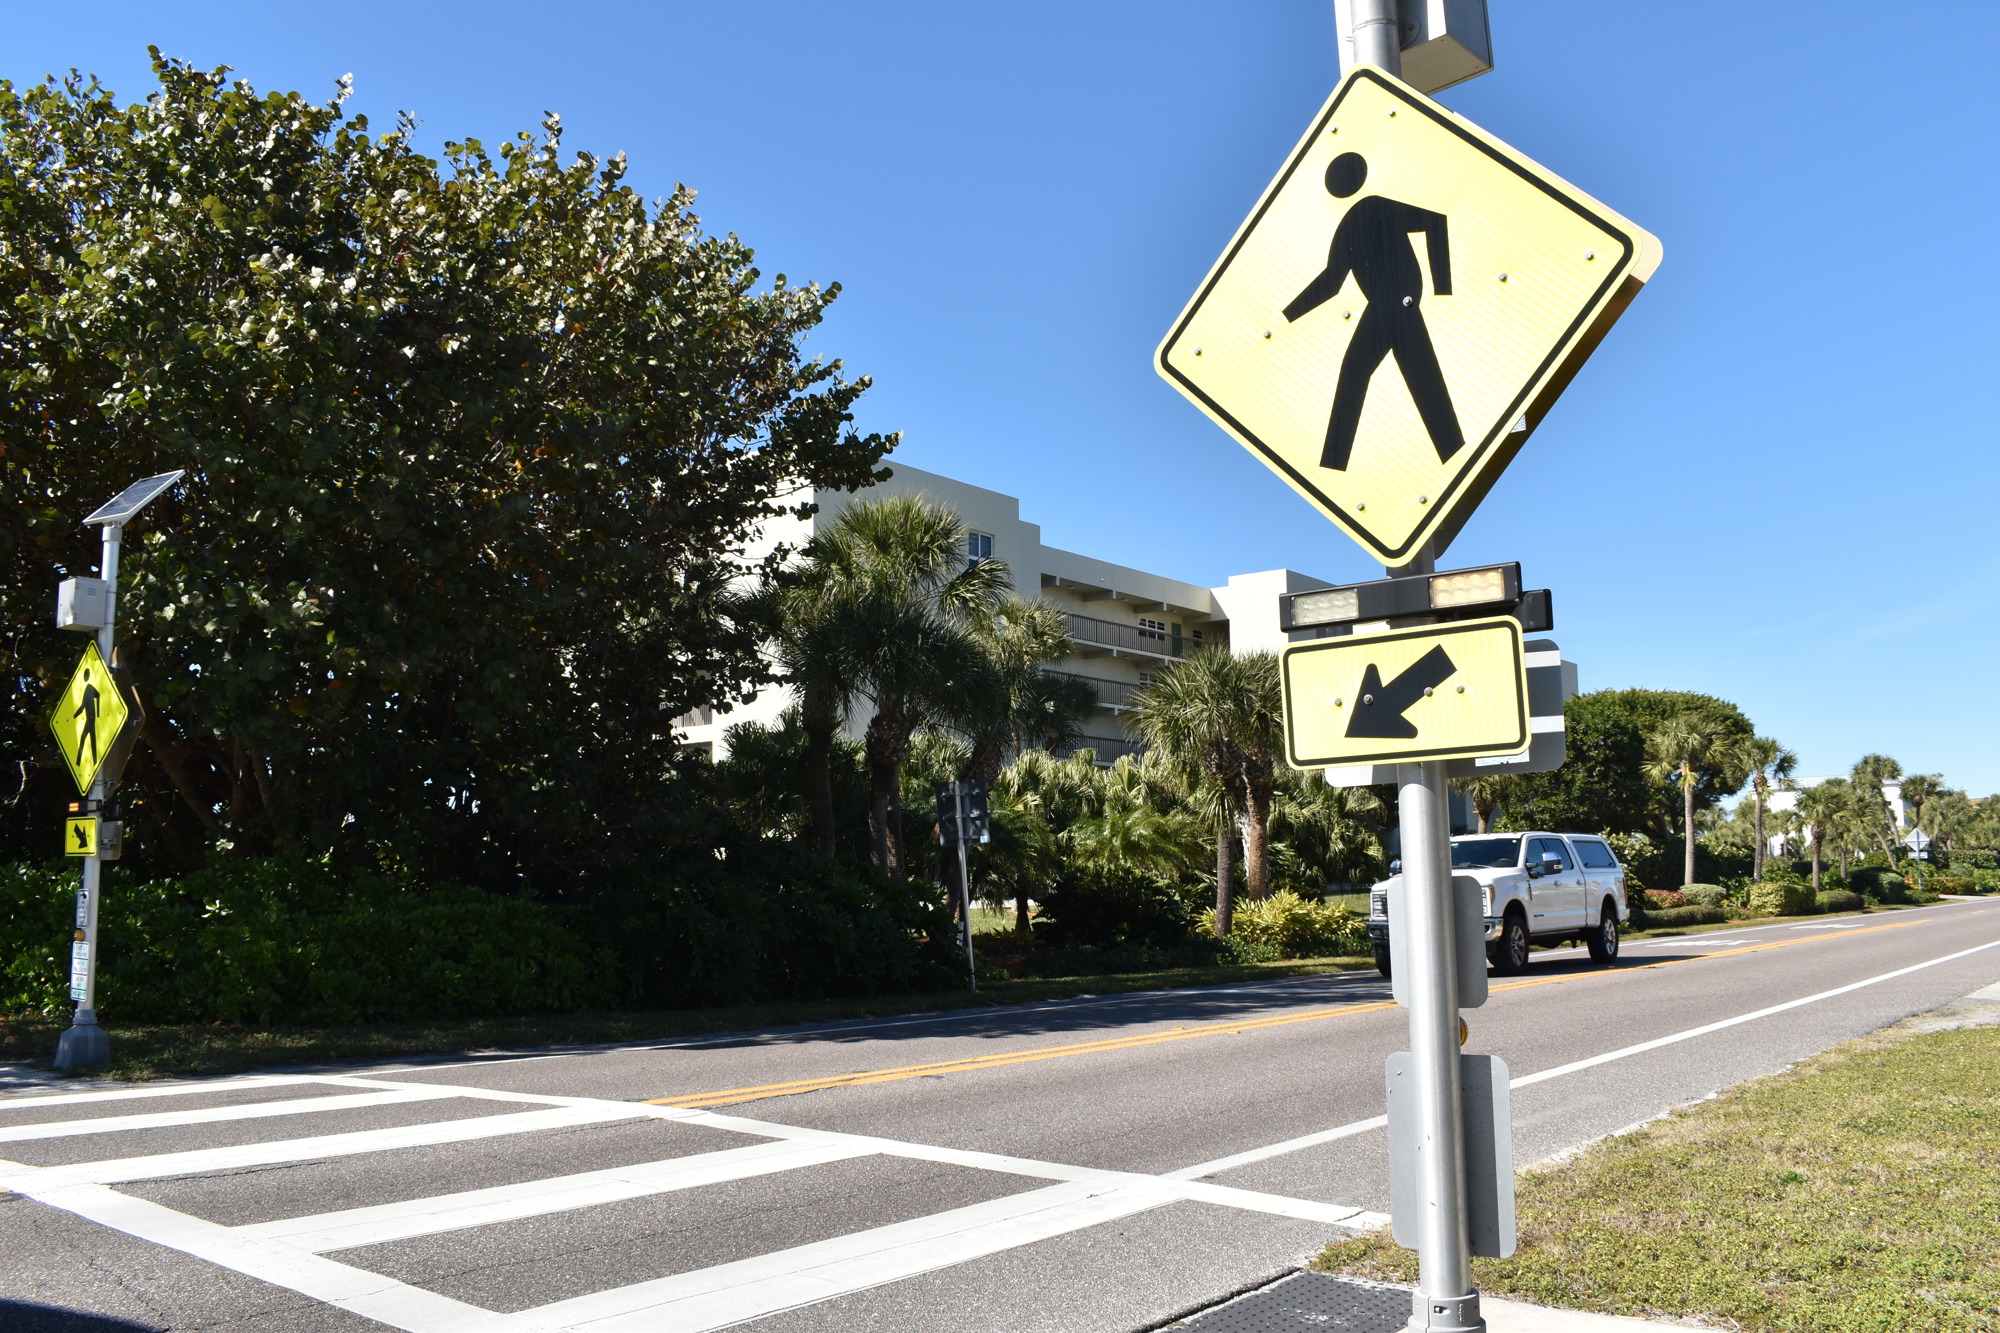 The town is planning on having a representative from the Florida Department of Transportation speak before the Town Commission in the coming weeks.